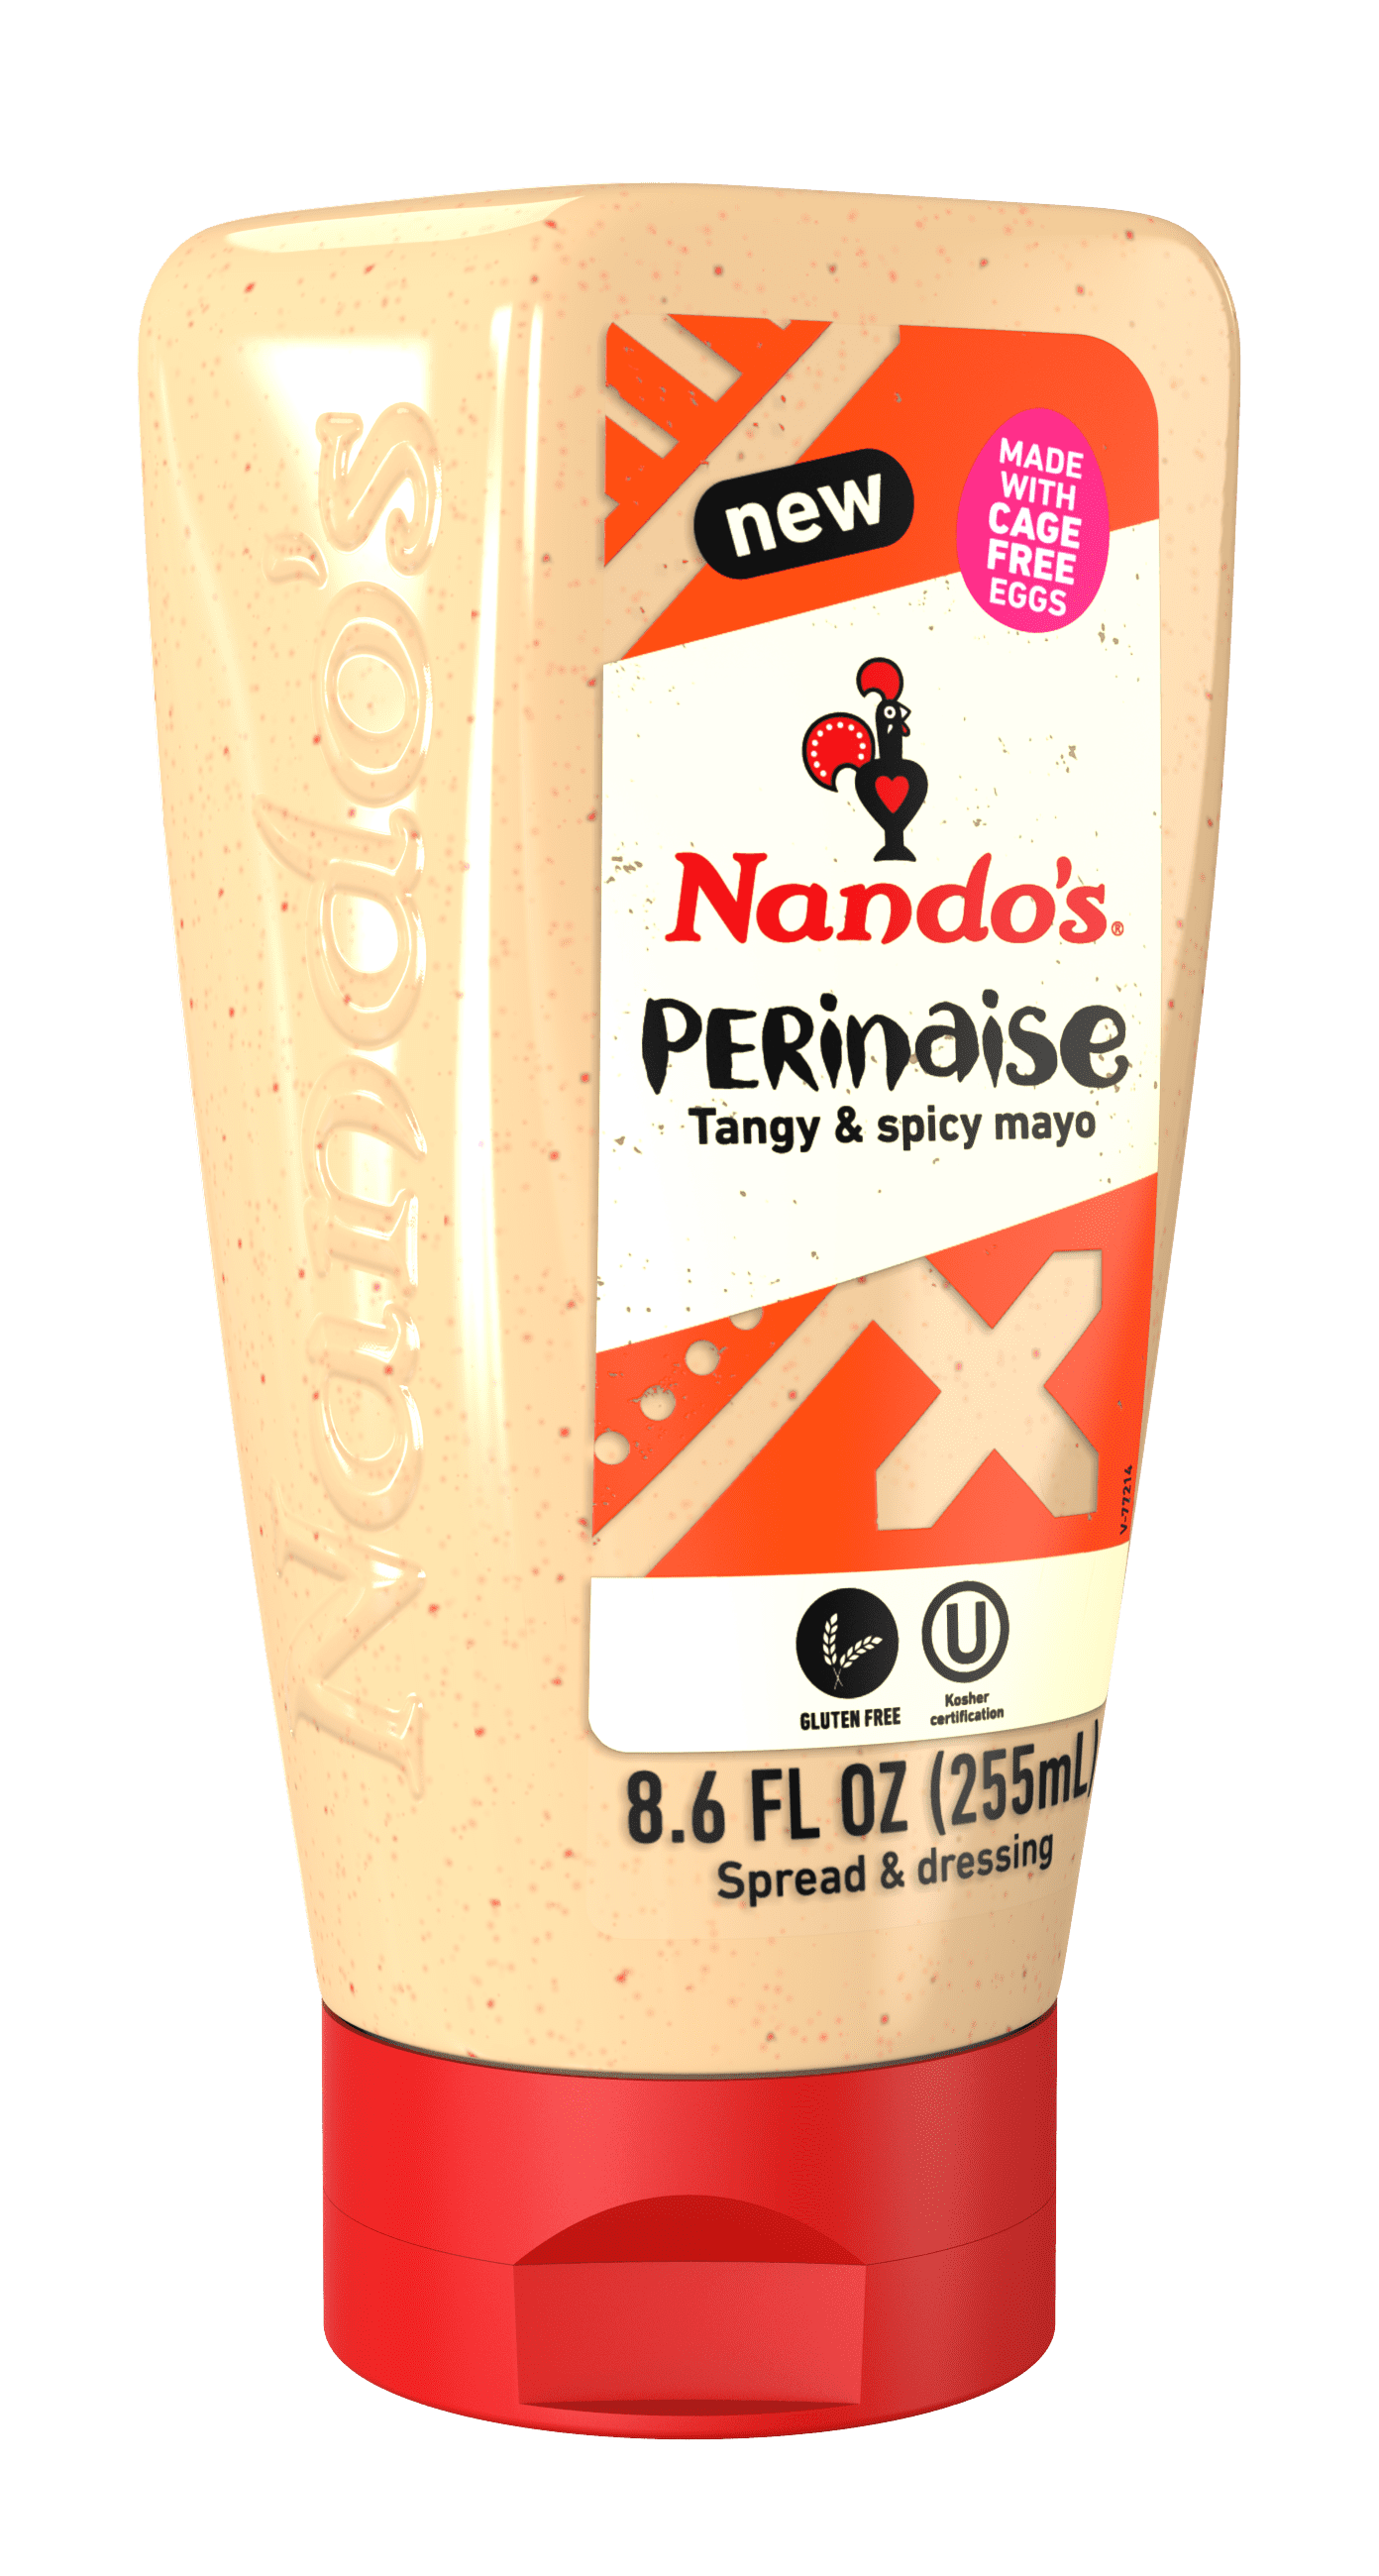 Nando's Original Spicy Mayo PERinaise Tangy Spread and Dressing, 8.6 fl oz